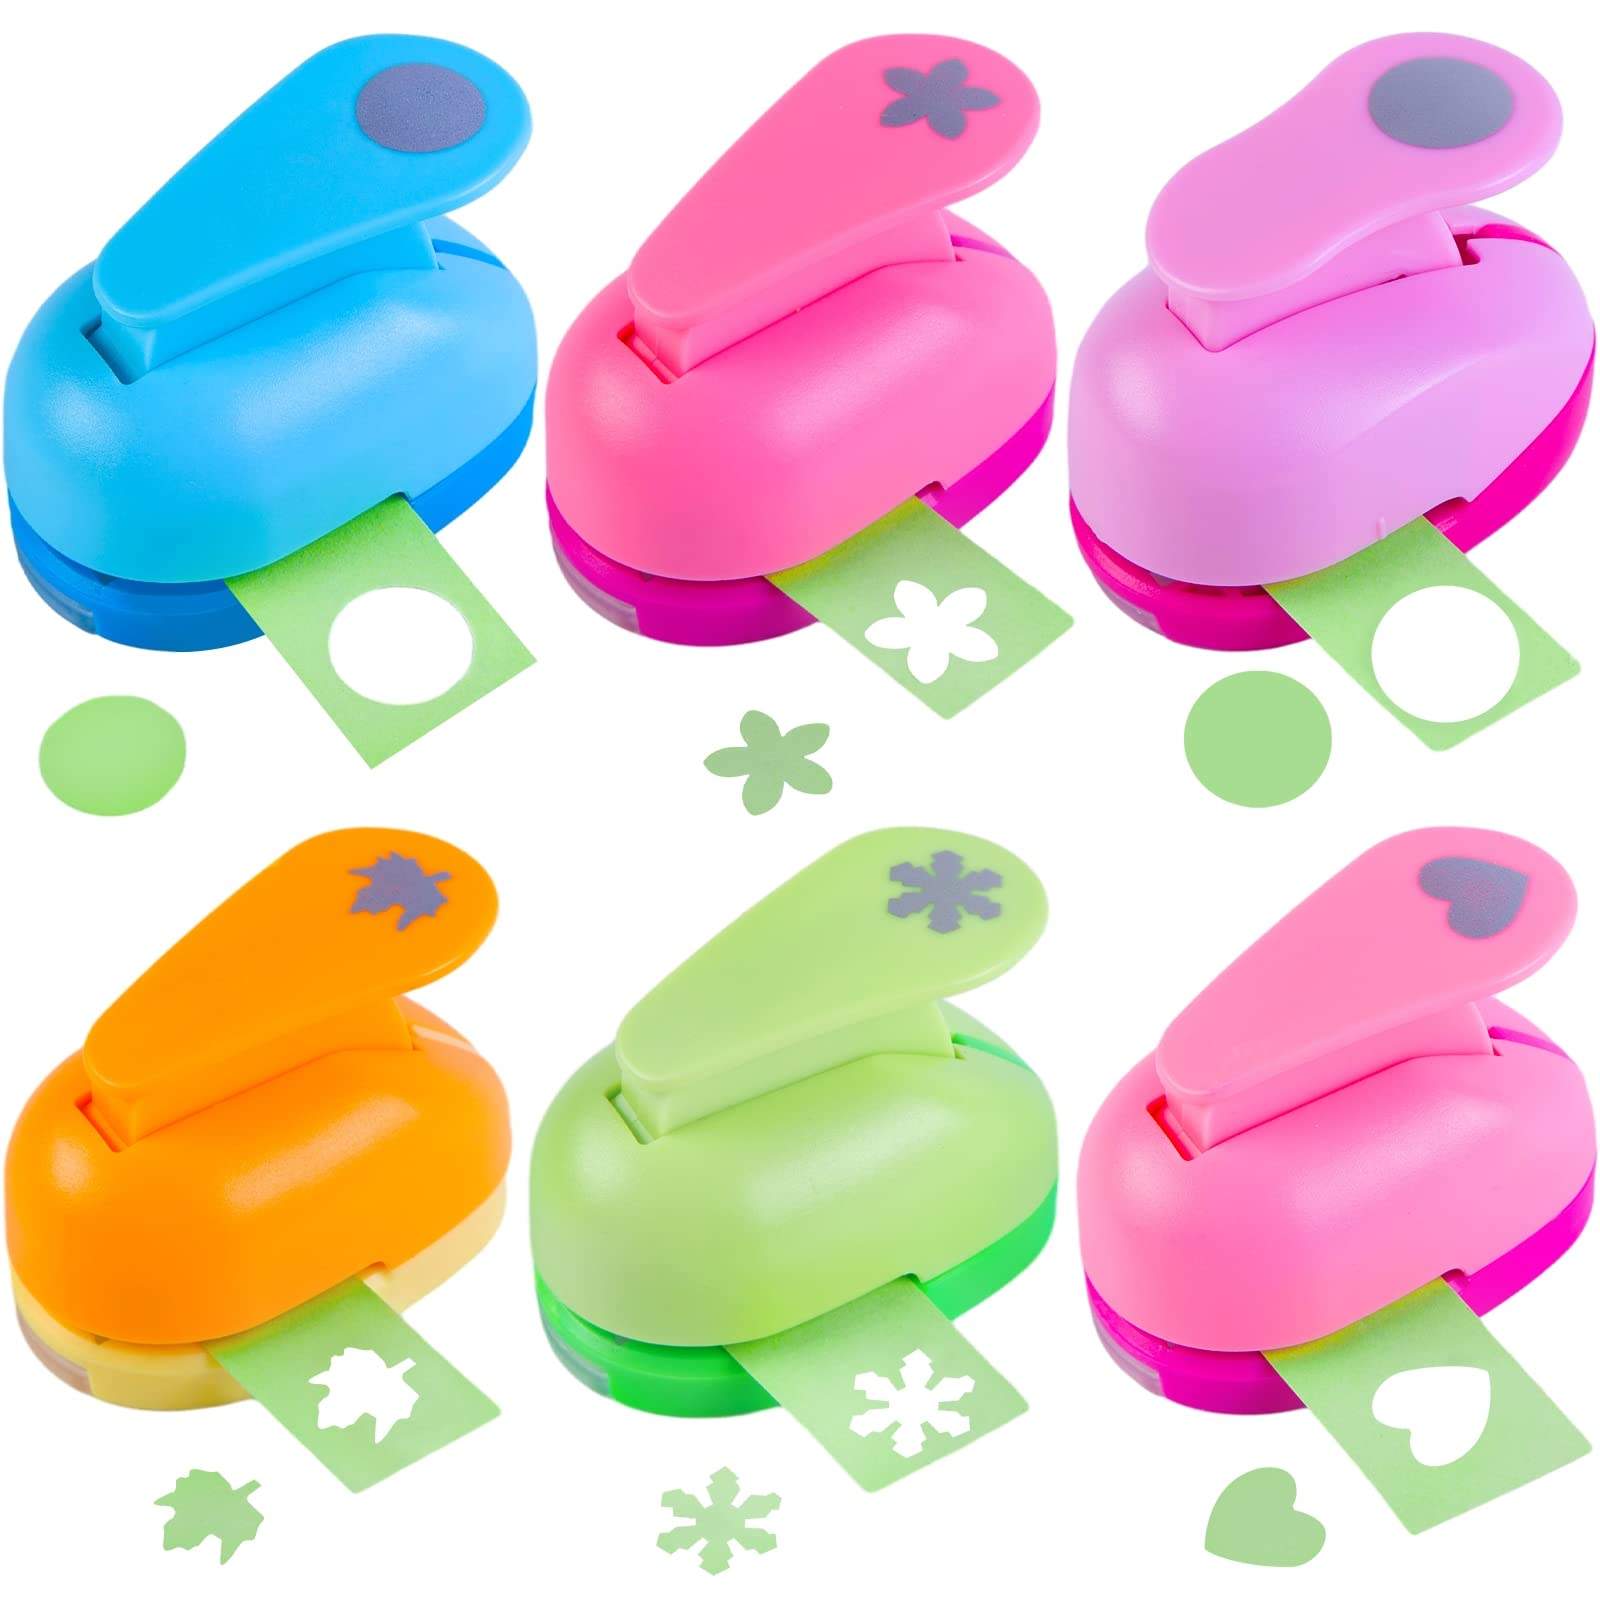 Loveinusa Punch Craft Set, 10 Pack Hole Punch Shapes Hole Punch Shape Supplies 